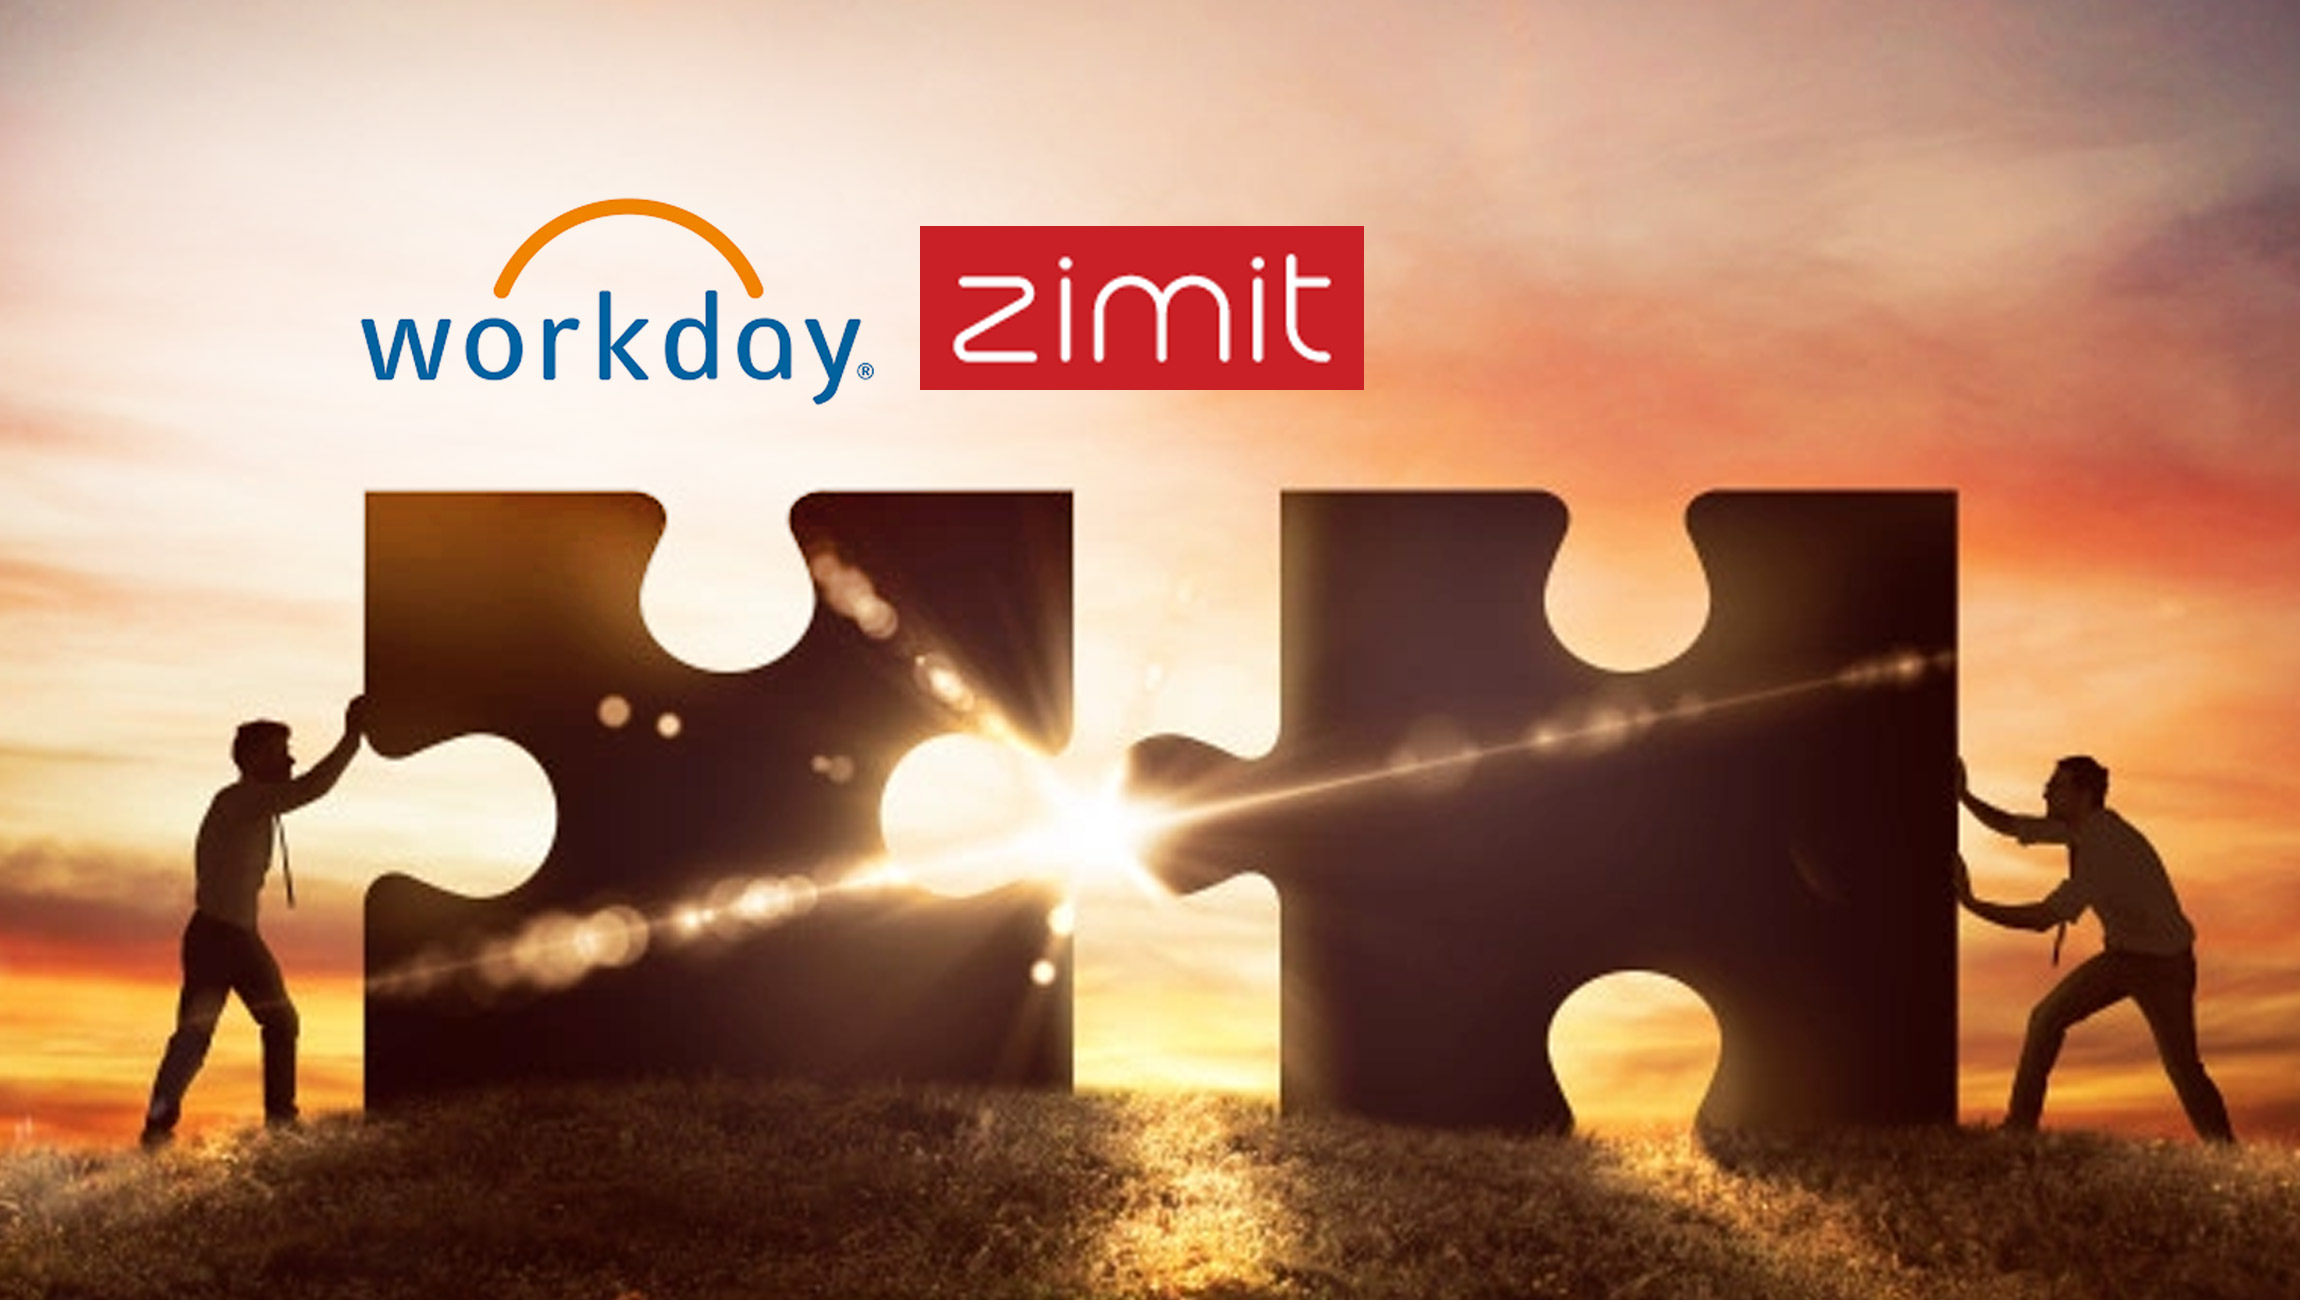 Workday Announces Intent to Acquire Zimit